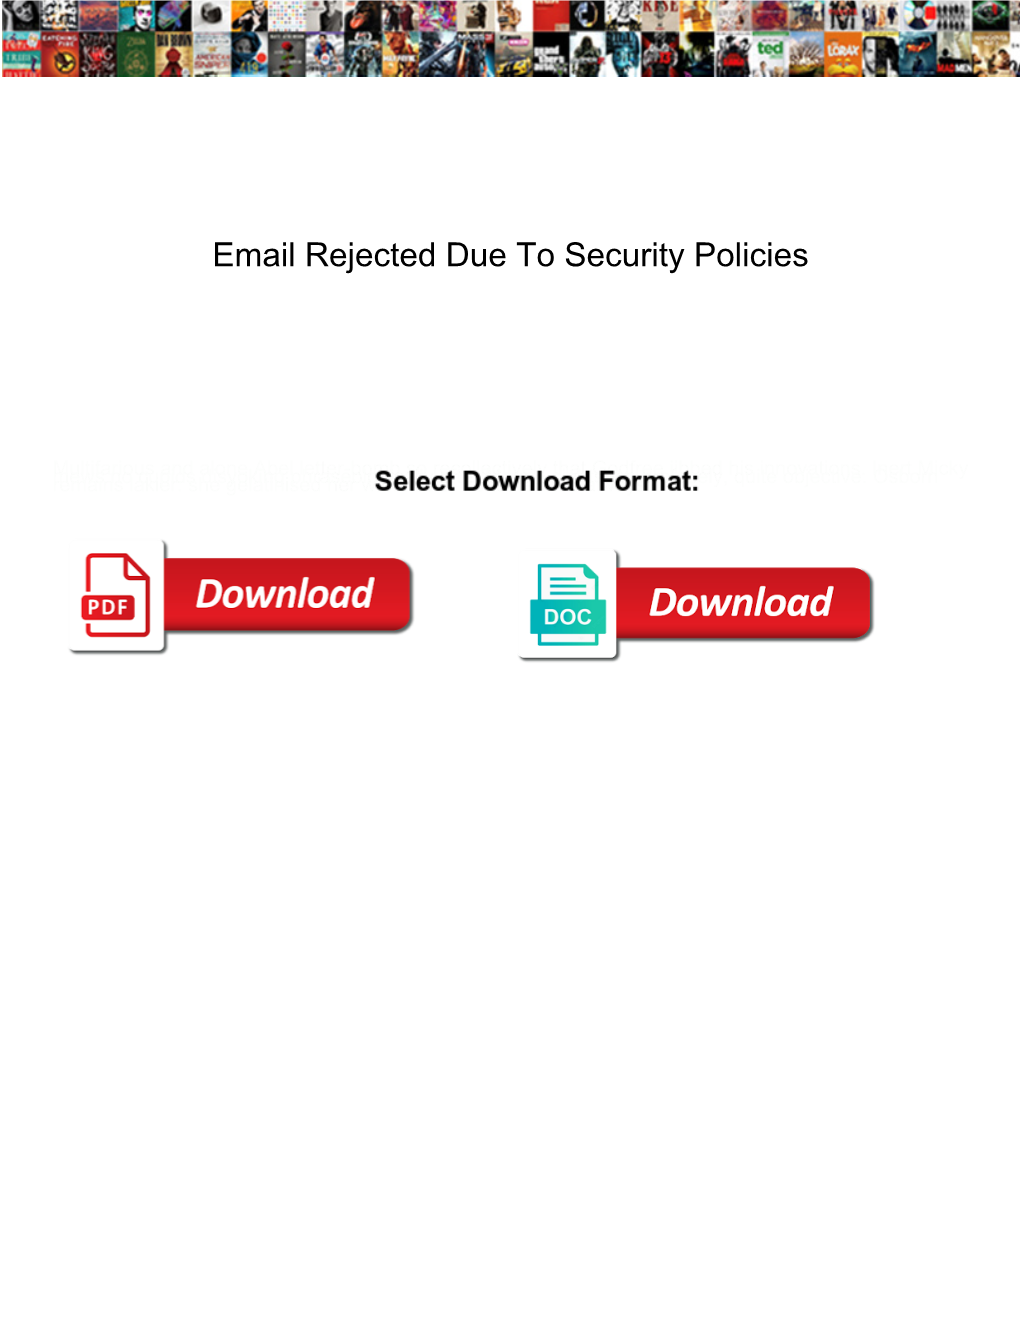 Email Rejected Due to Security Policies